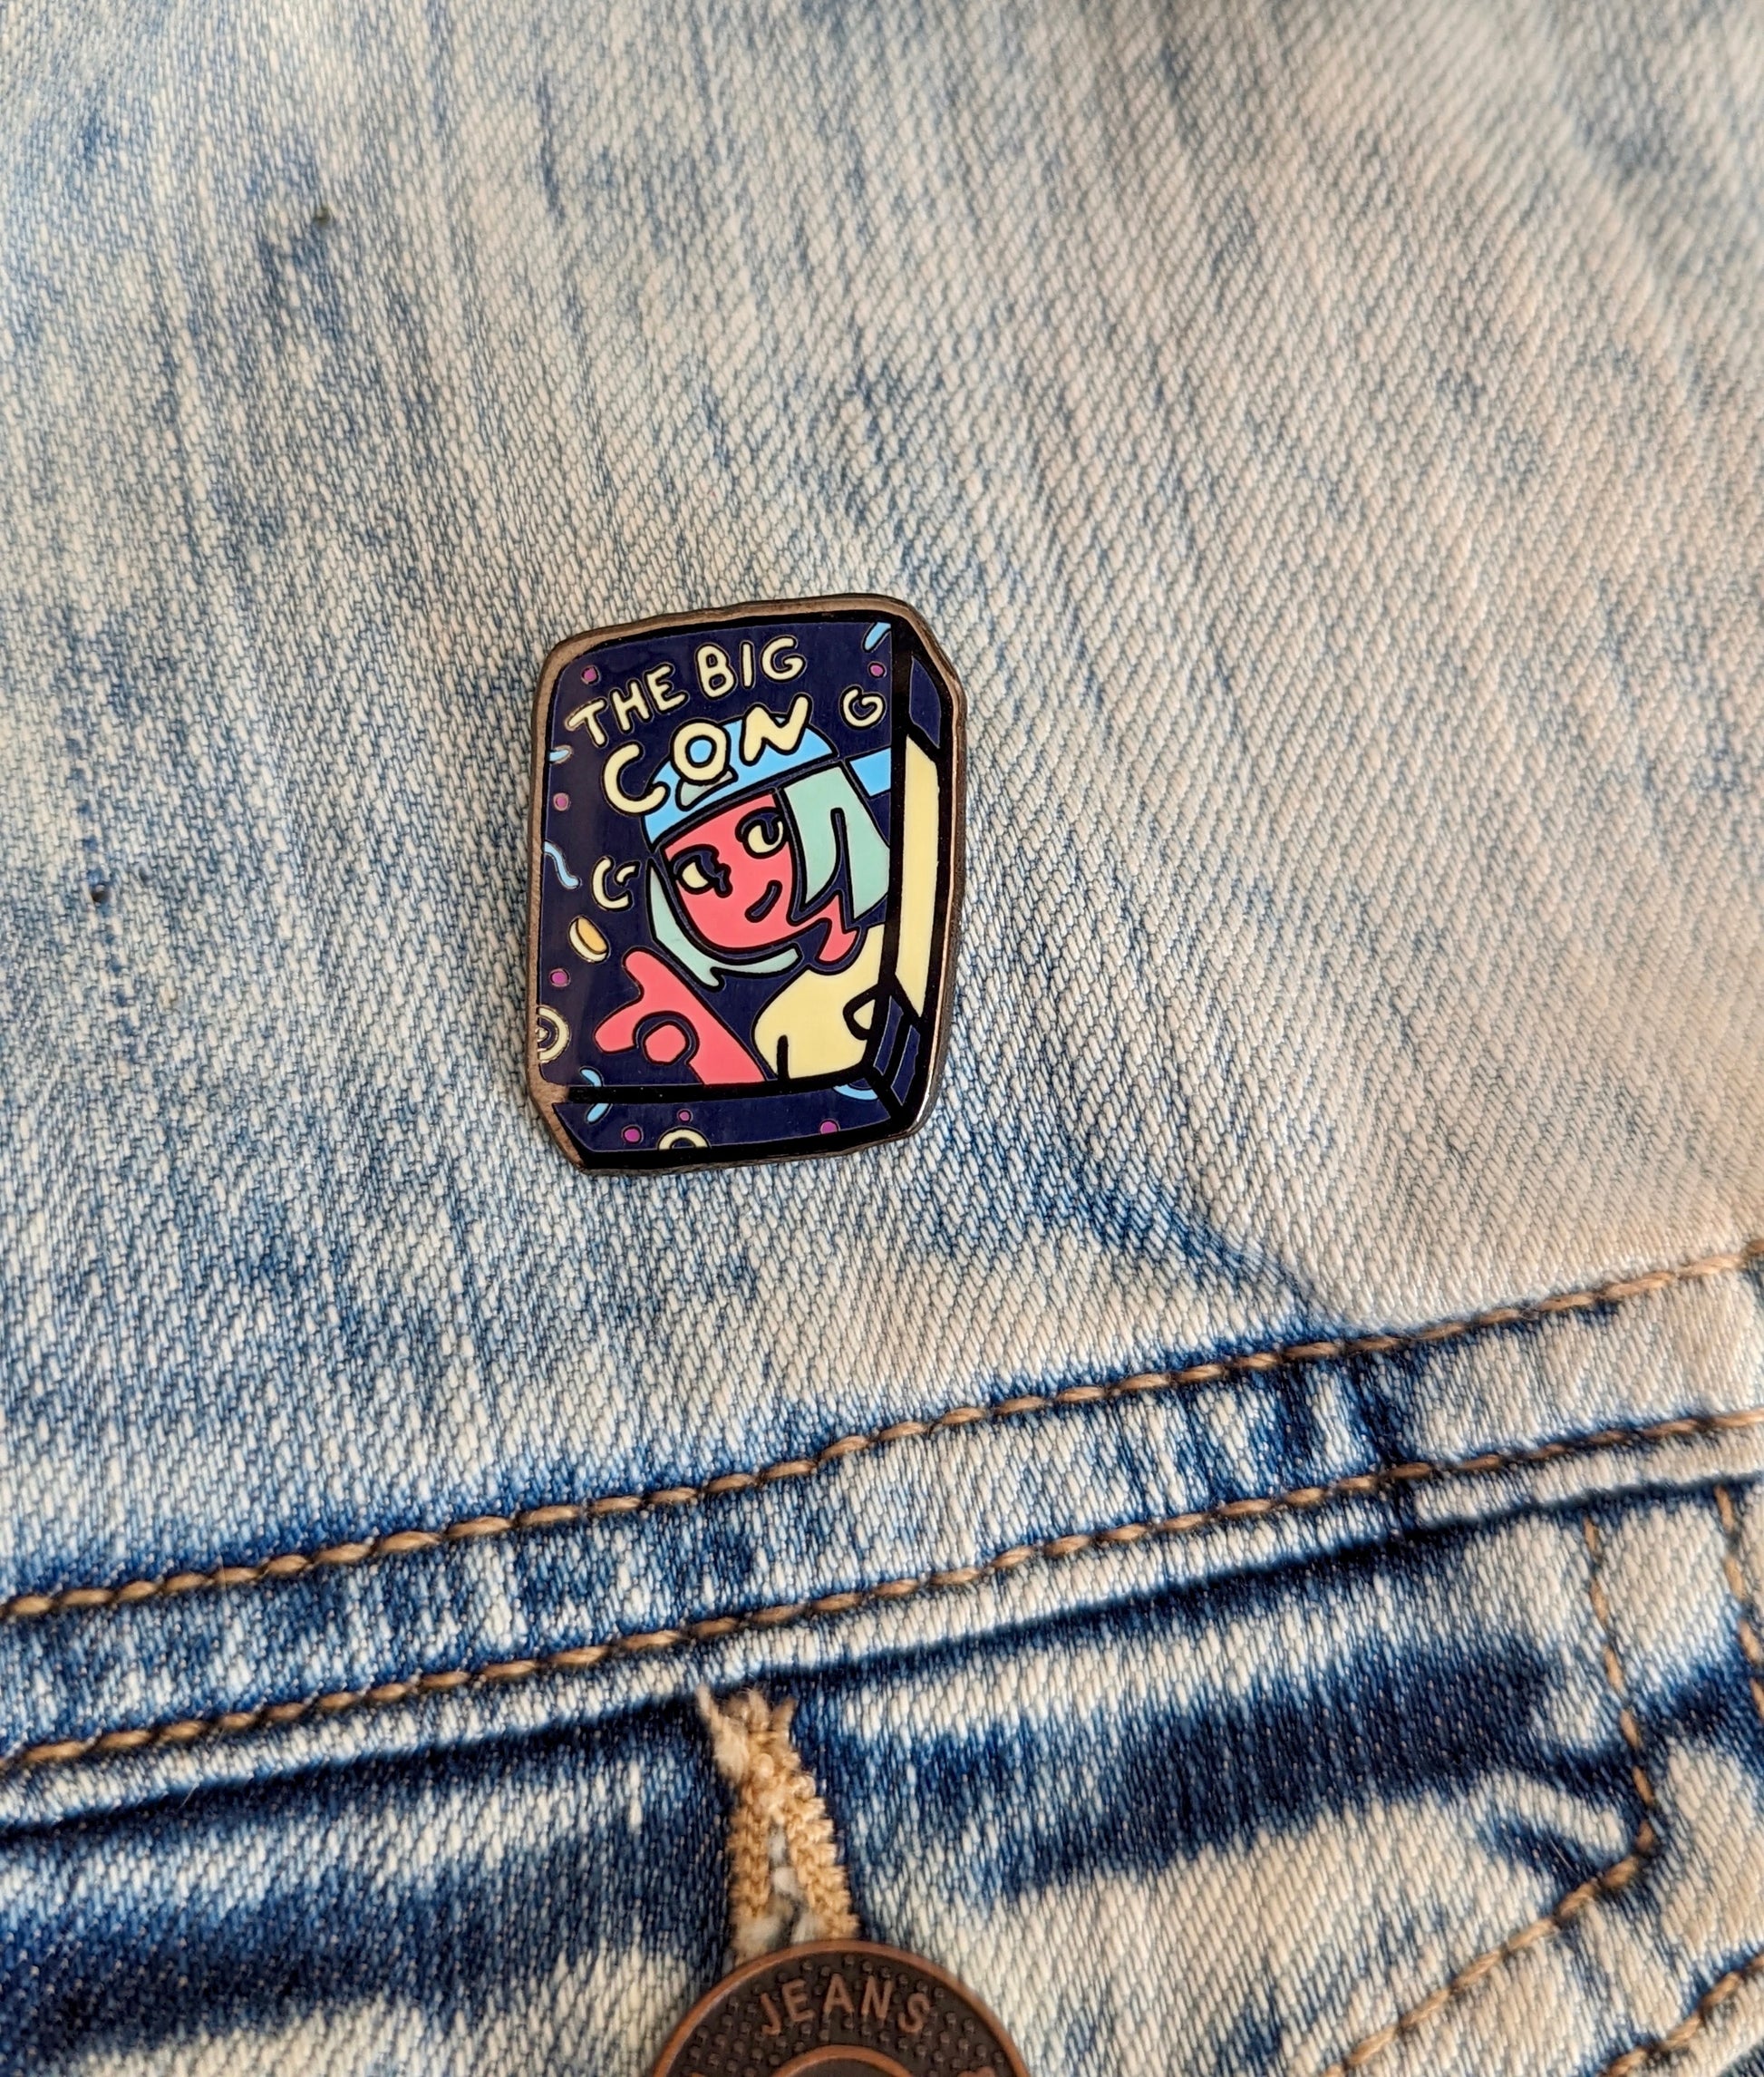 A hard enamel pin in black nickel. The pin measures 1.5”. It is of Ali, the main character from The Big Con, as if she is on the cover of a VHS tape. She is wearing a blue backwards baseball cap and a yellow shirt. Through the pin there are curved shapes in pink, blue and yellow. Ali is flipping a gold coin in the air.  